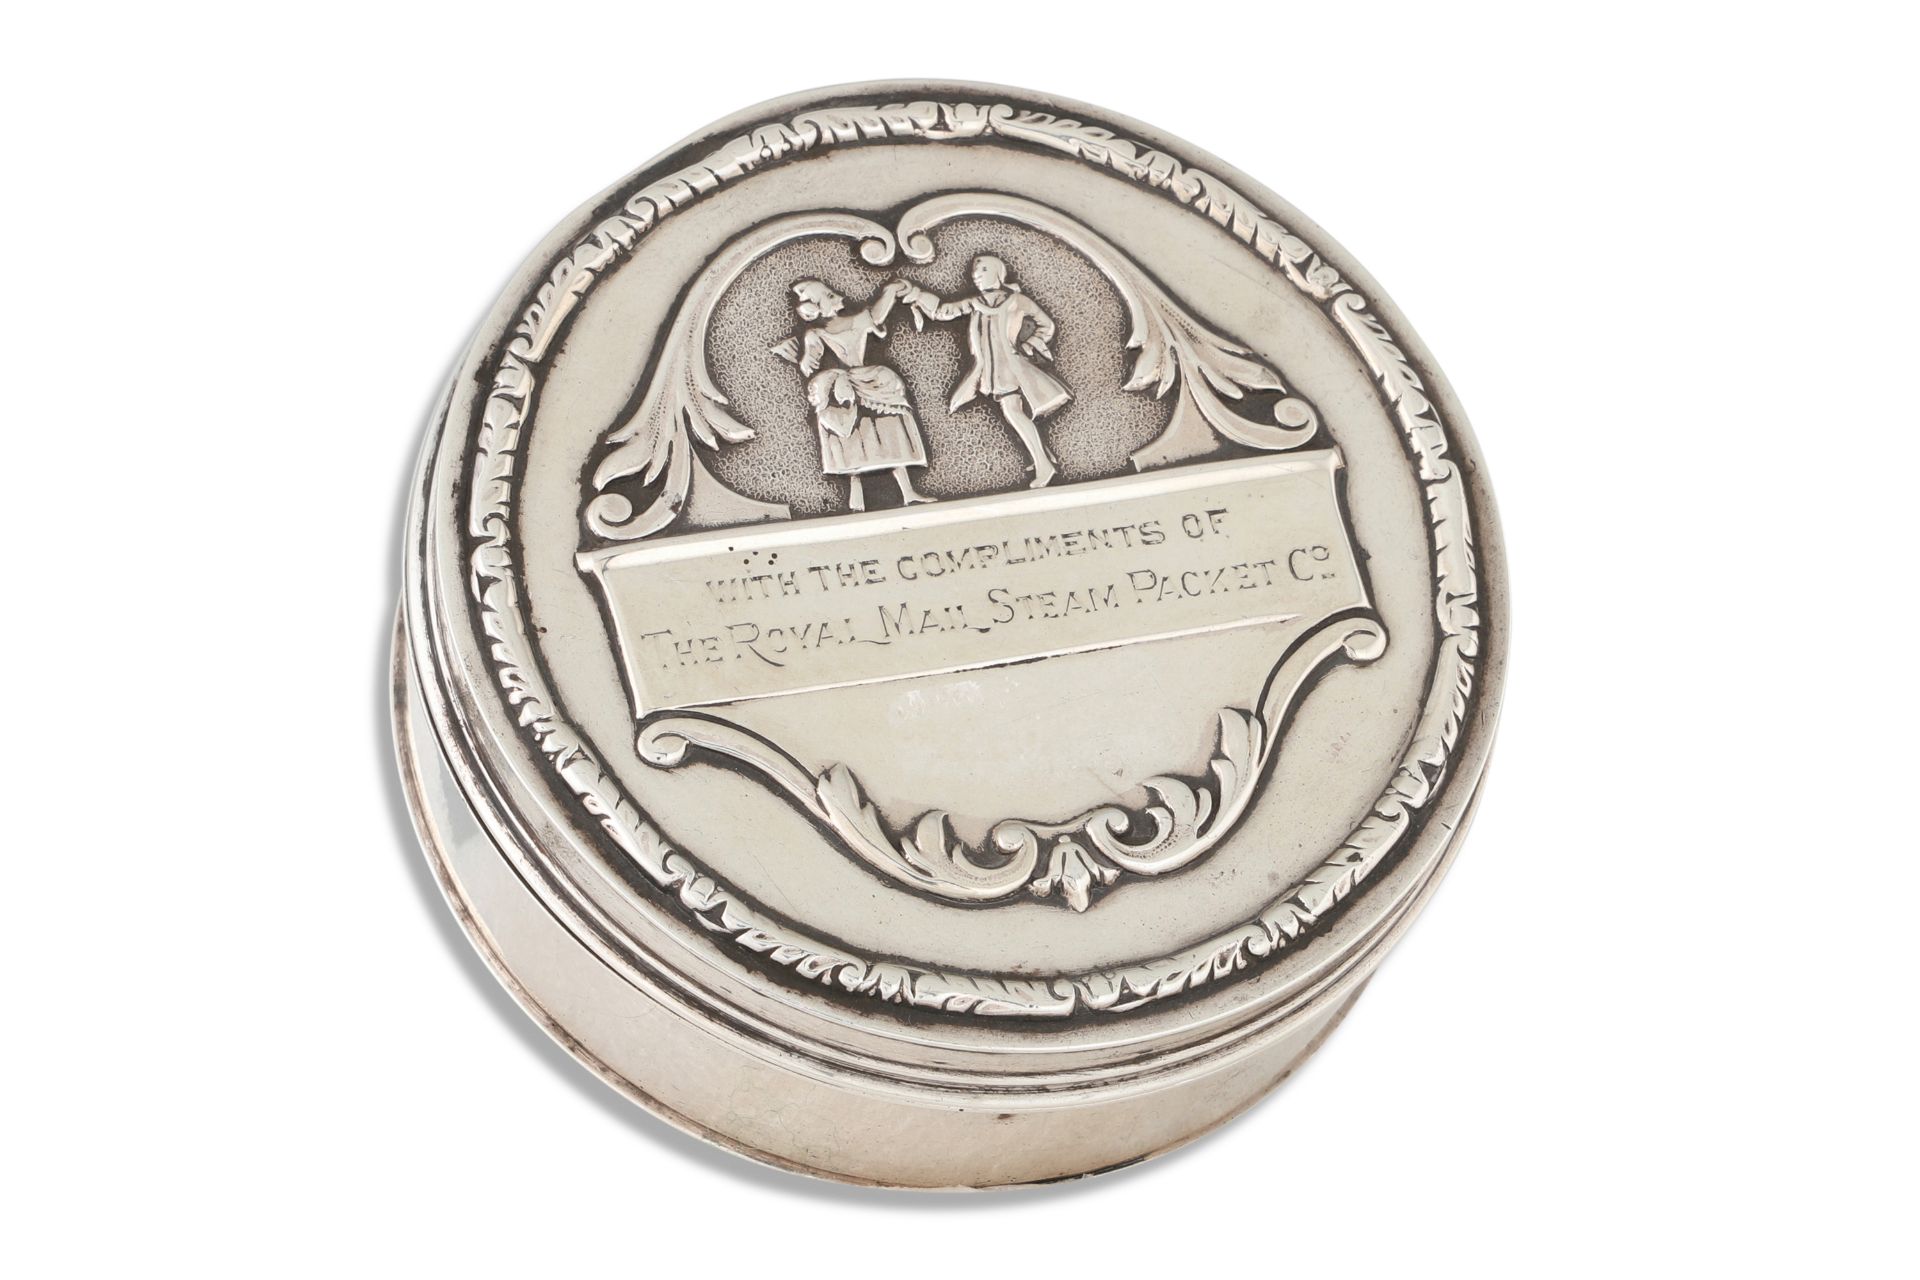 A GEORGE V CIRCULAR SILVER POWDER BOX, "with the compliments of Royal Mail steam packet Co.'',